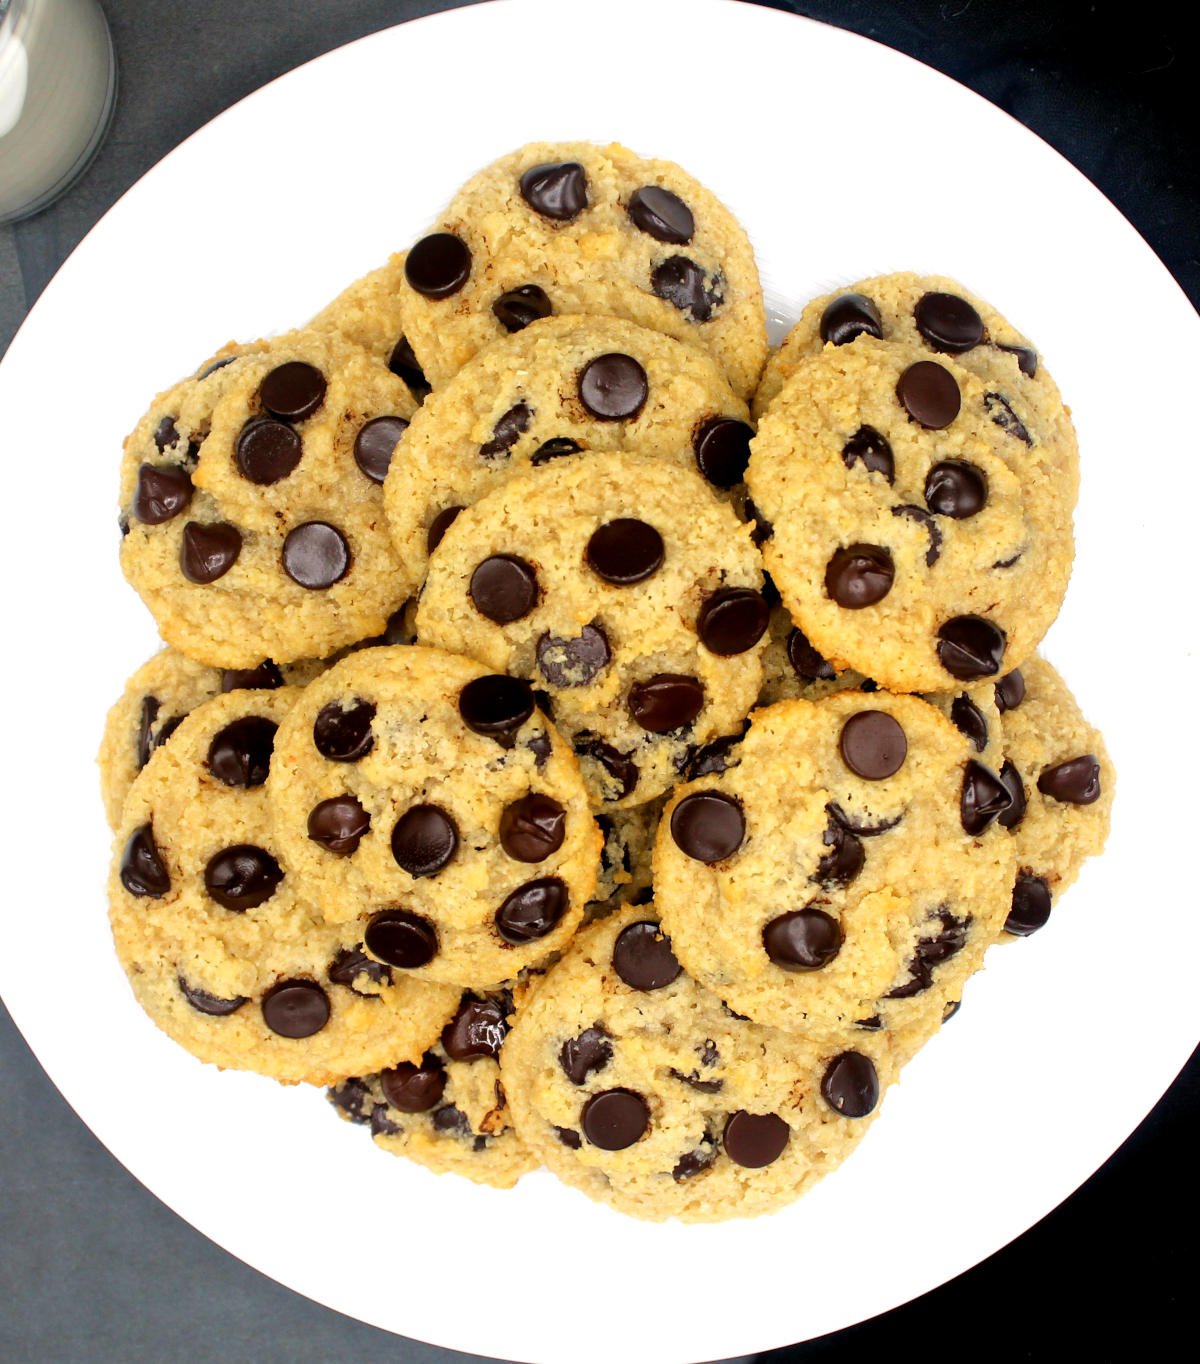 Overhead photo of a plate of vegan keto chocolate chip cookies with lots of chocolate chips.